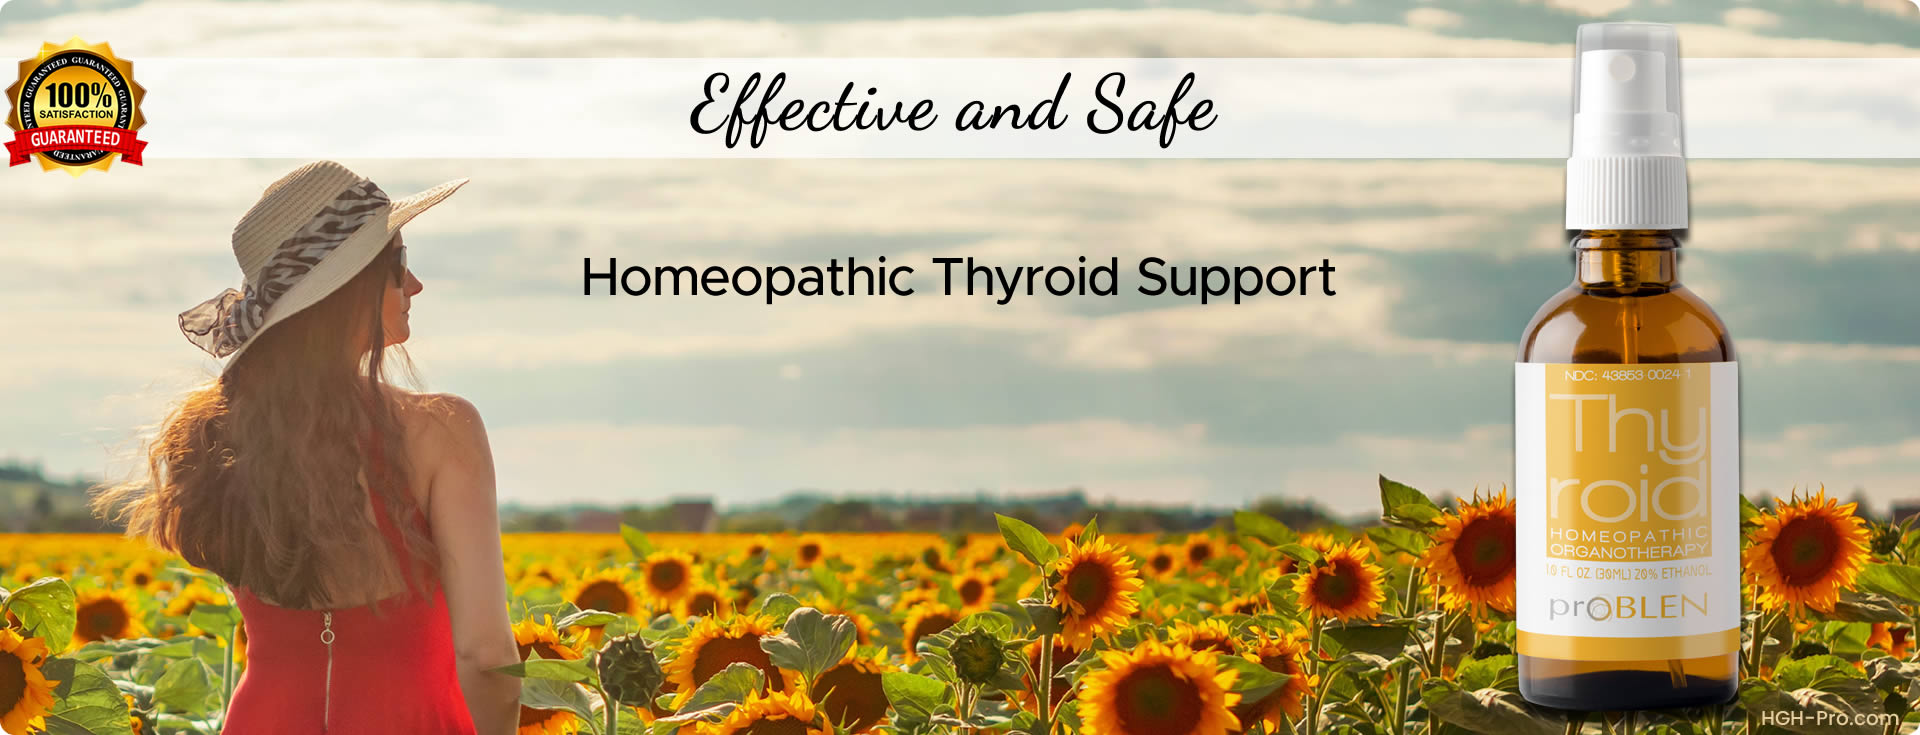 Homeopathic Thyroid Supplement